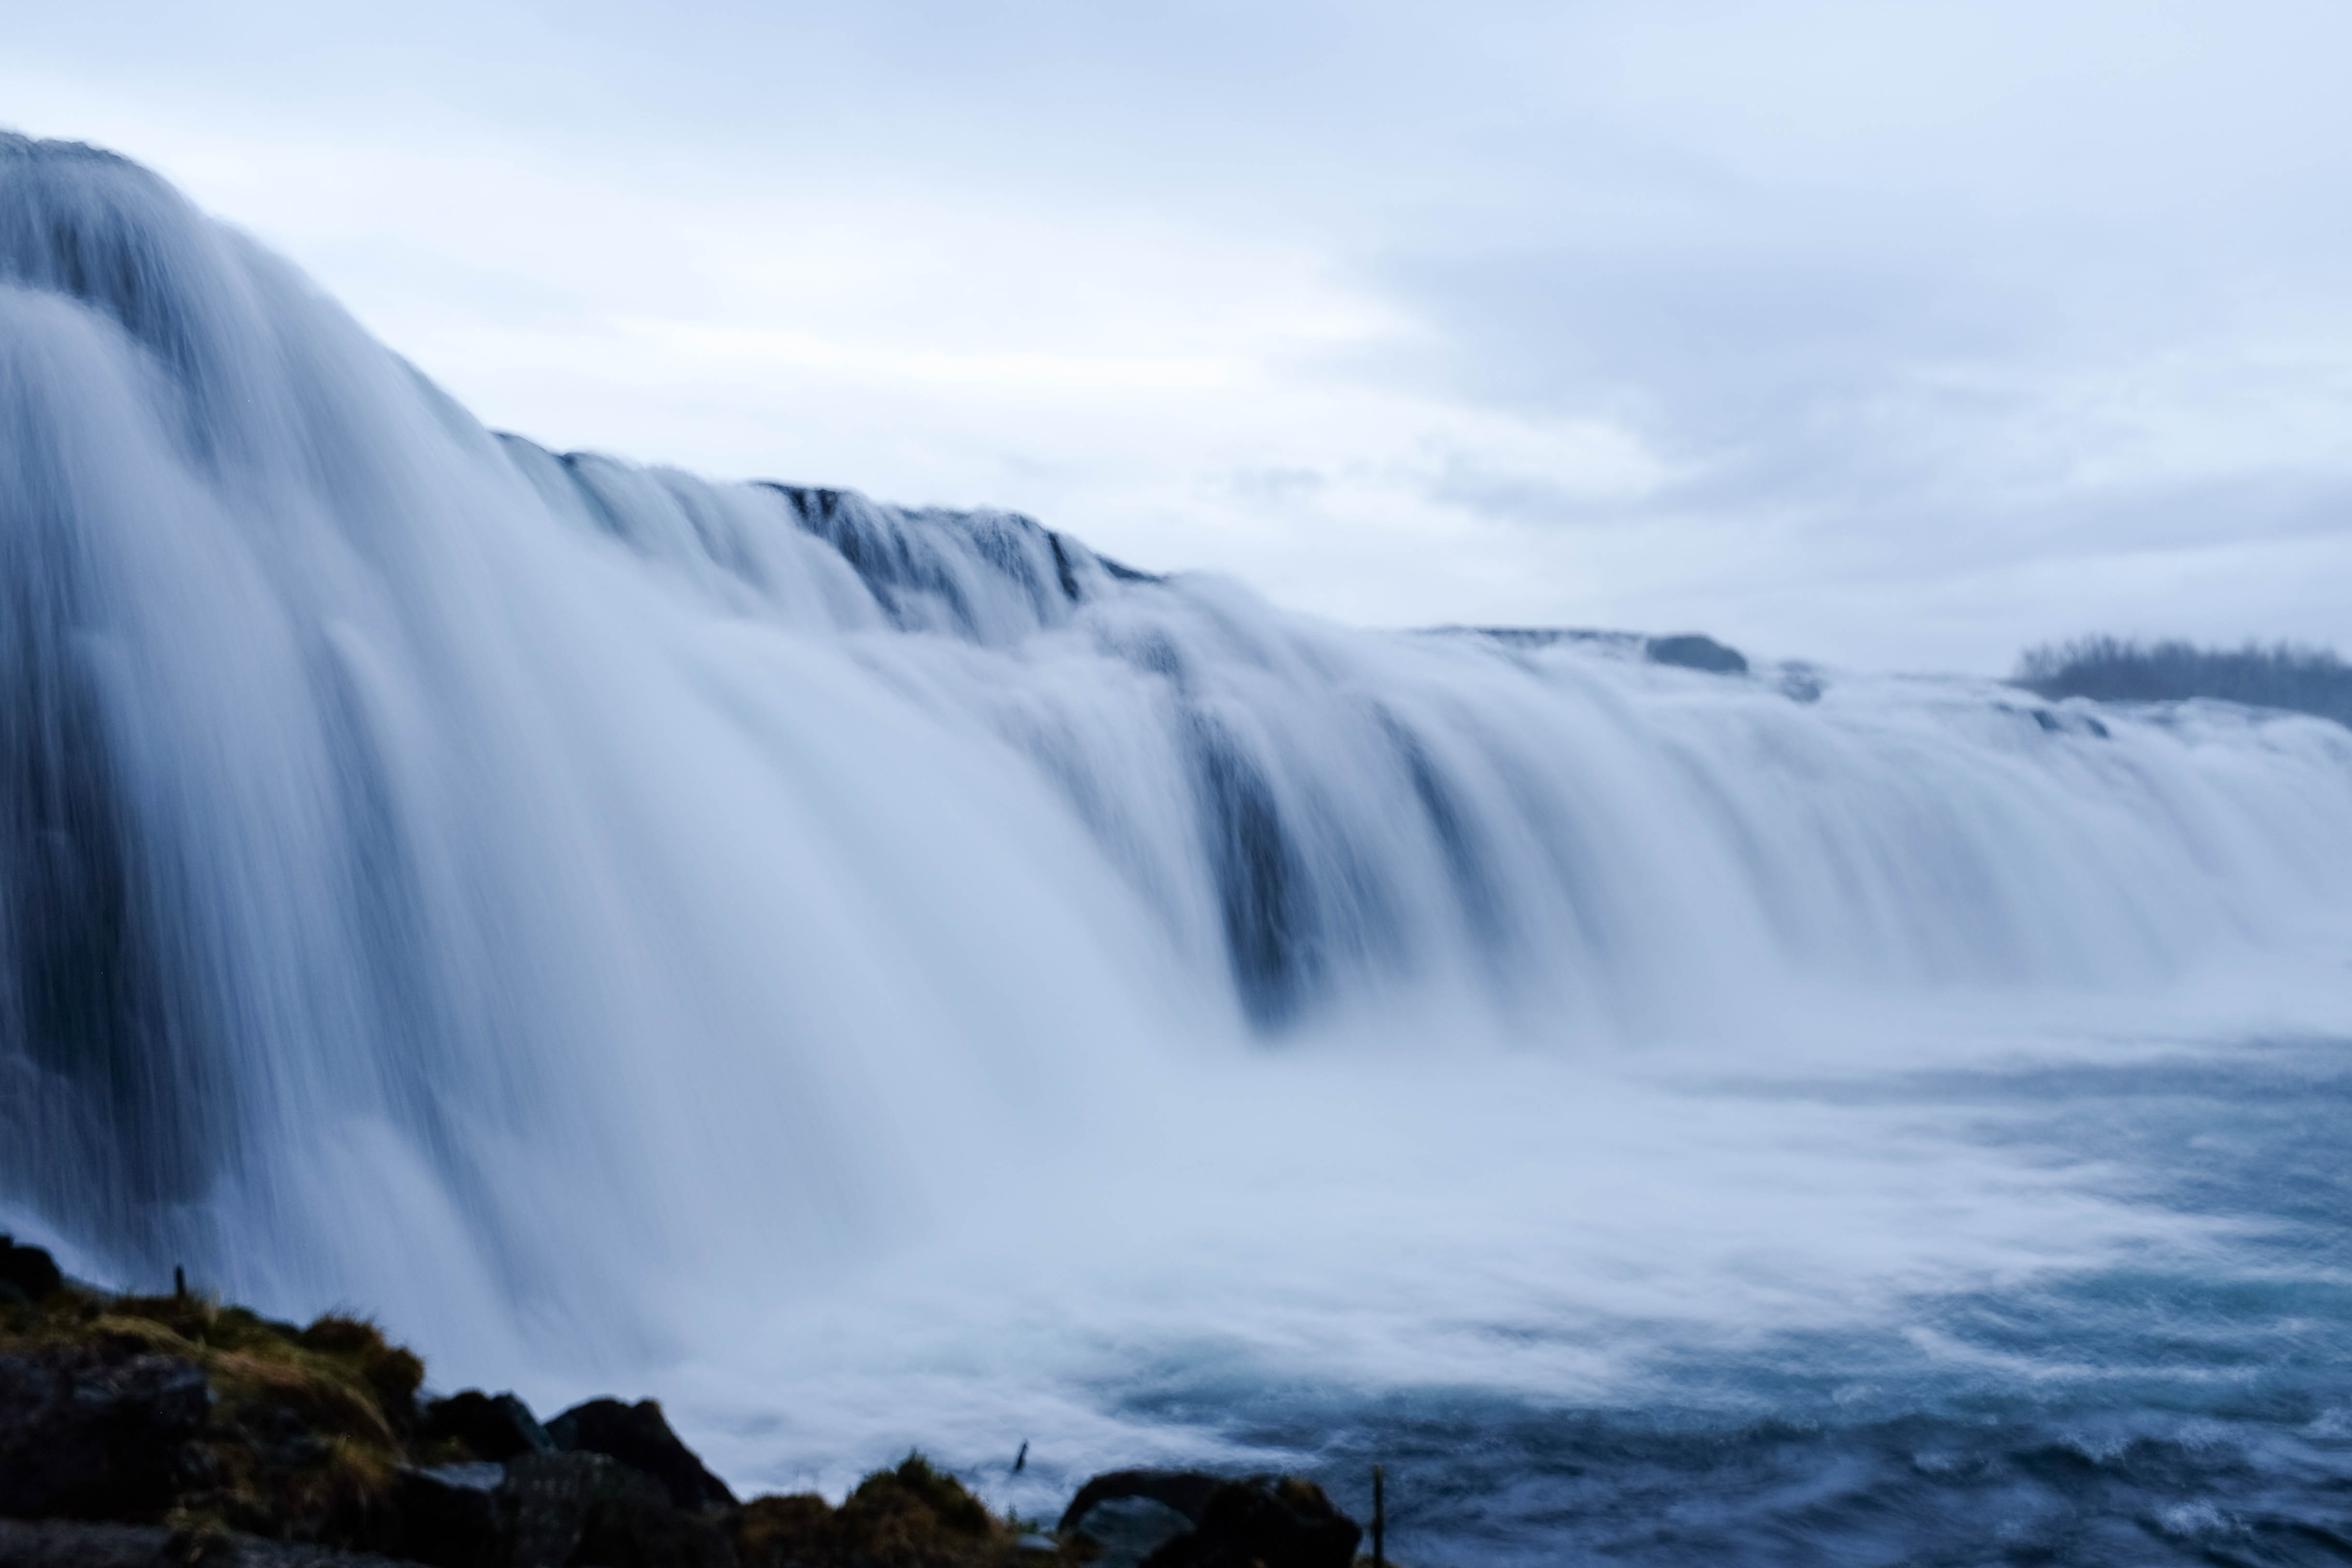 7-waterfalls-to-see-in-iceland-14.jpg